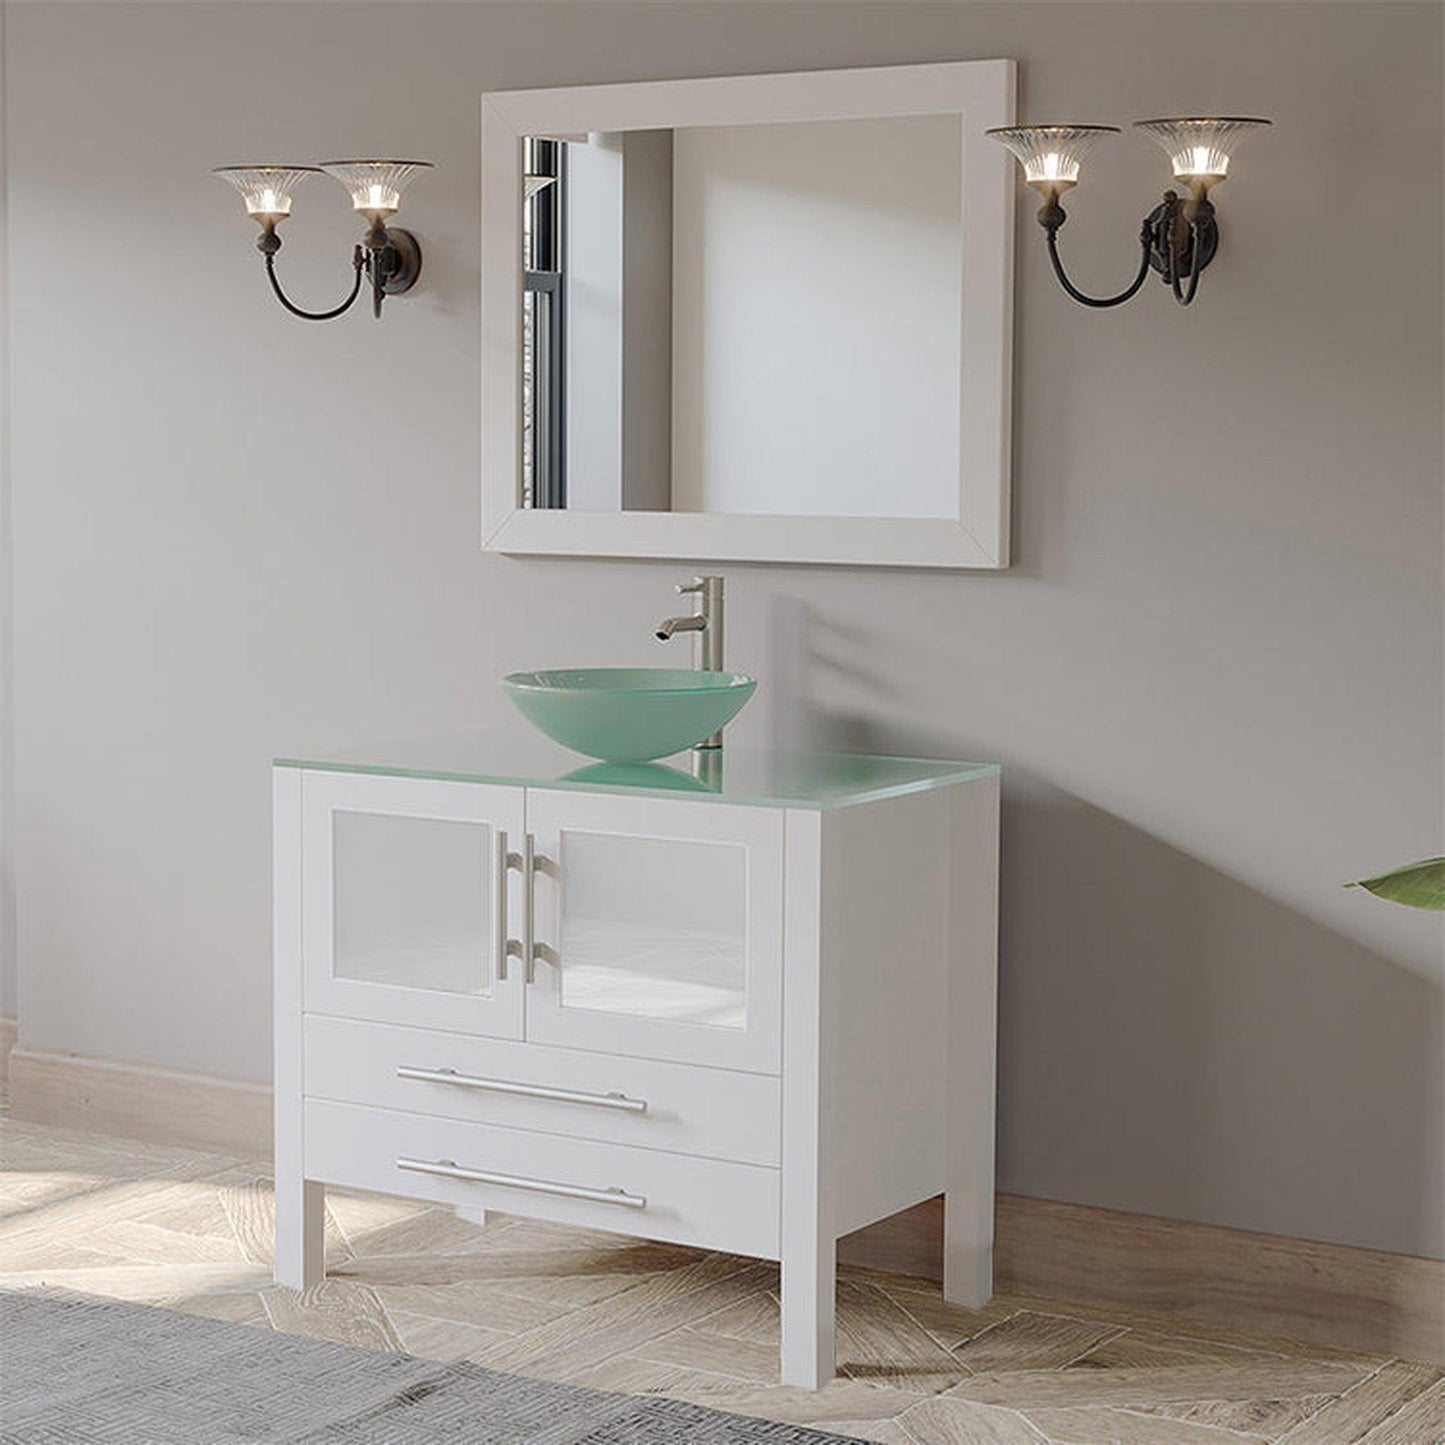 Cambridge Plumbing 36" White Wood Single Vanity Set With Tempered Glass Countertop And Circular Vessel Sink With Brushed Nickel Plumbing Finish